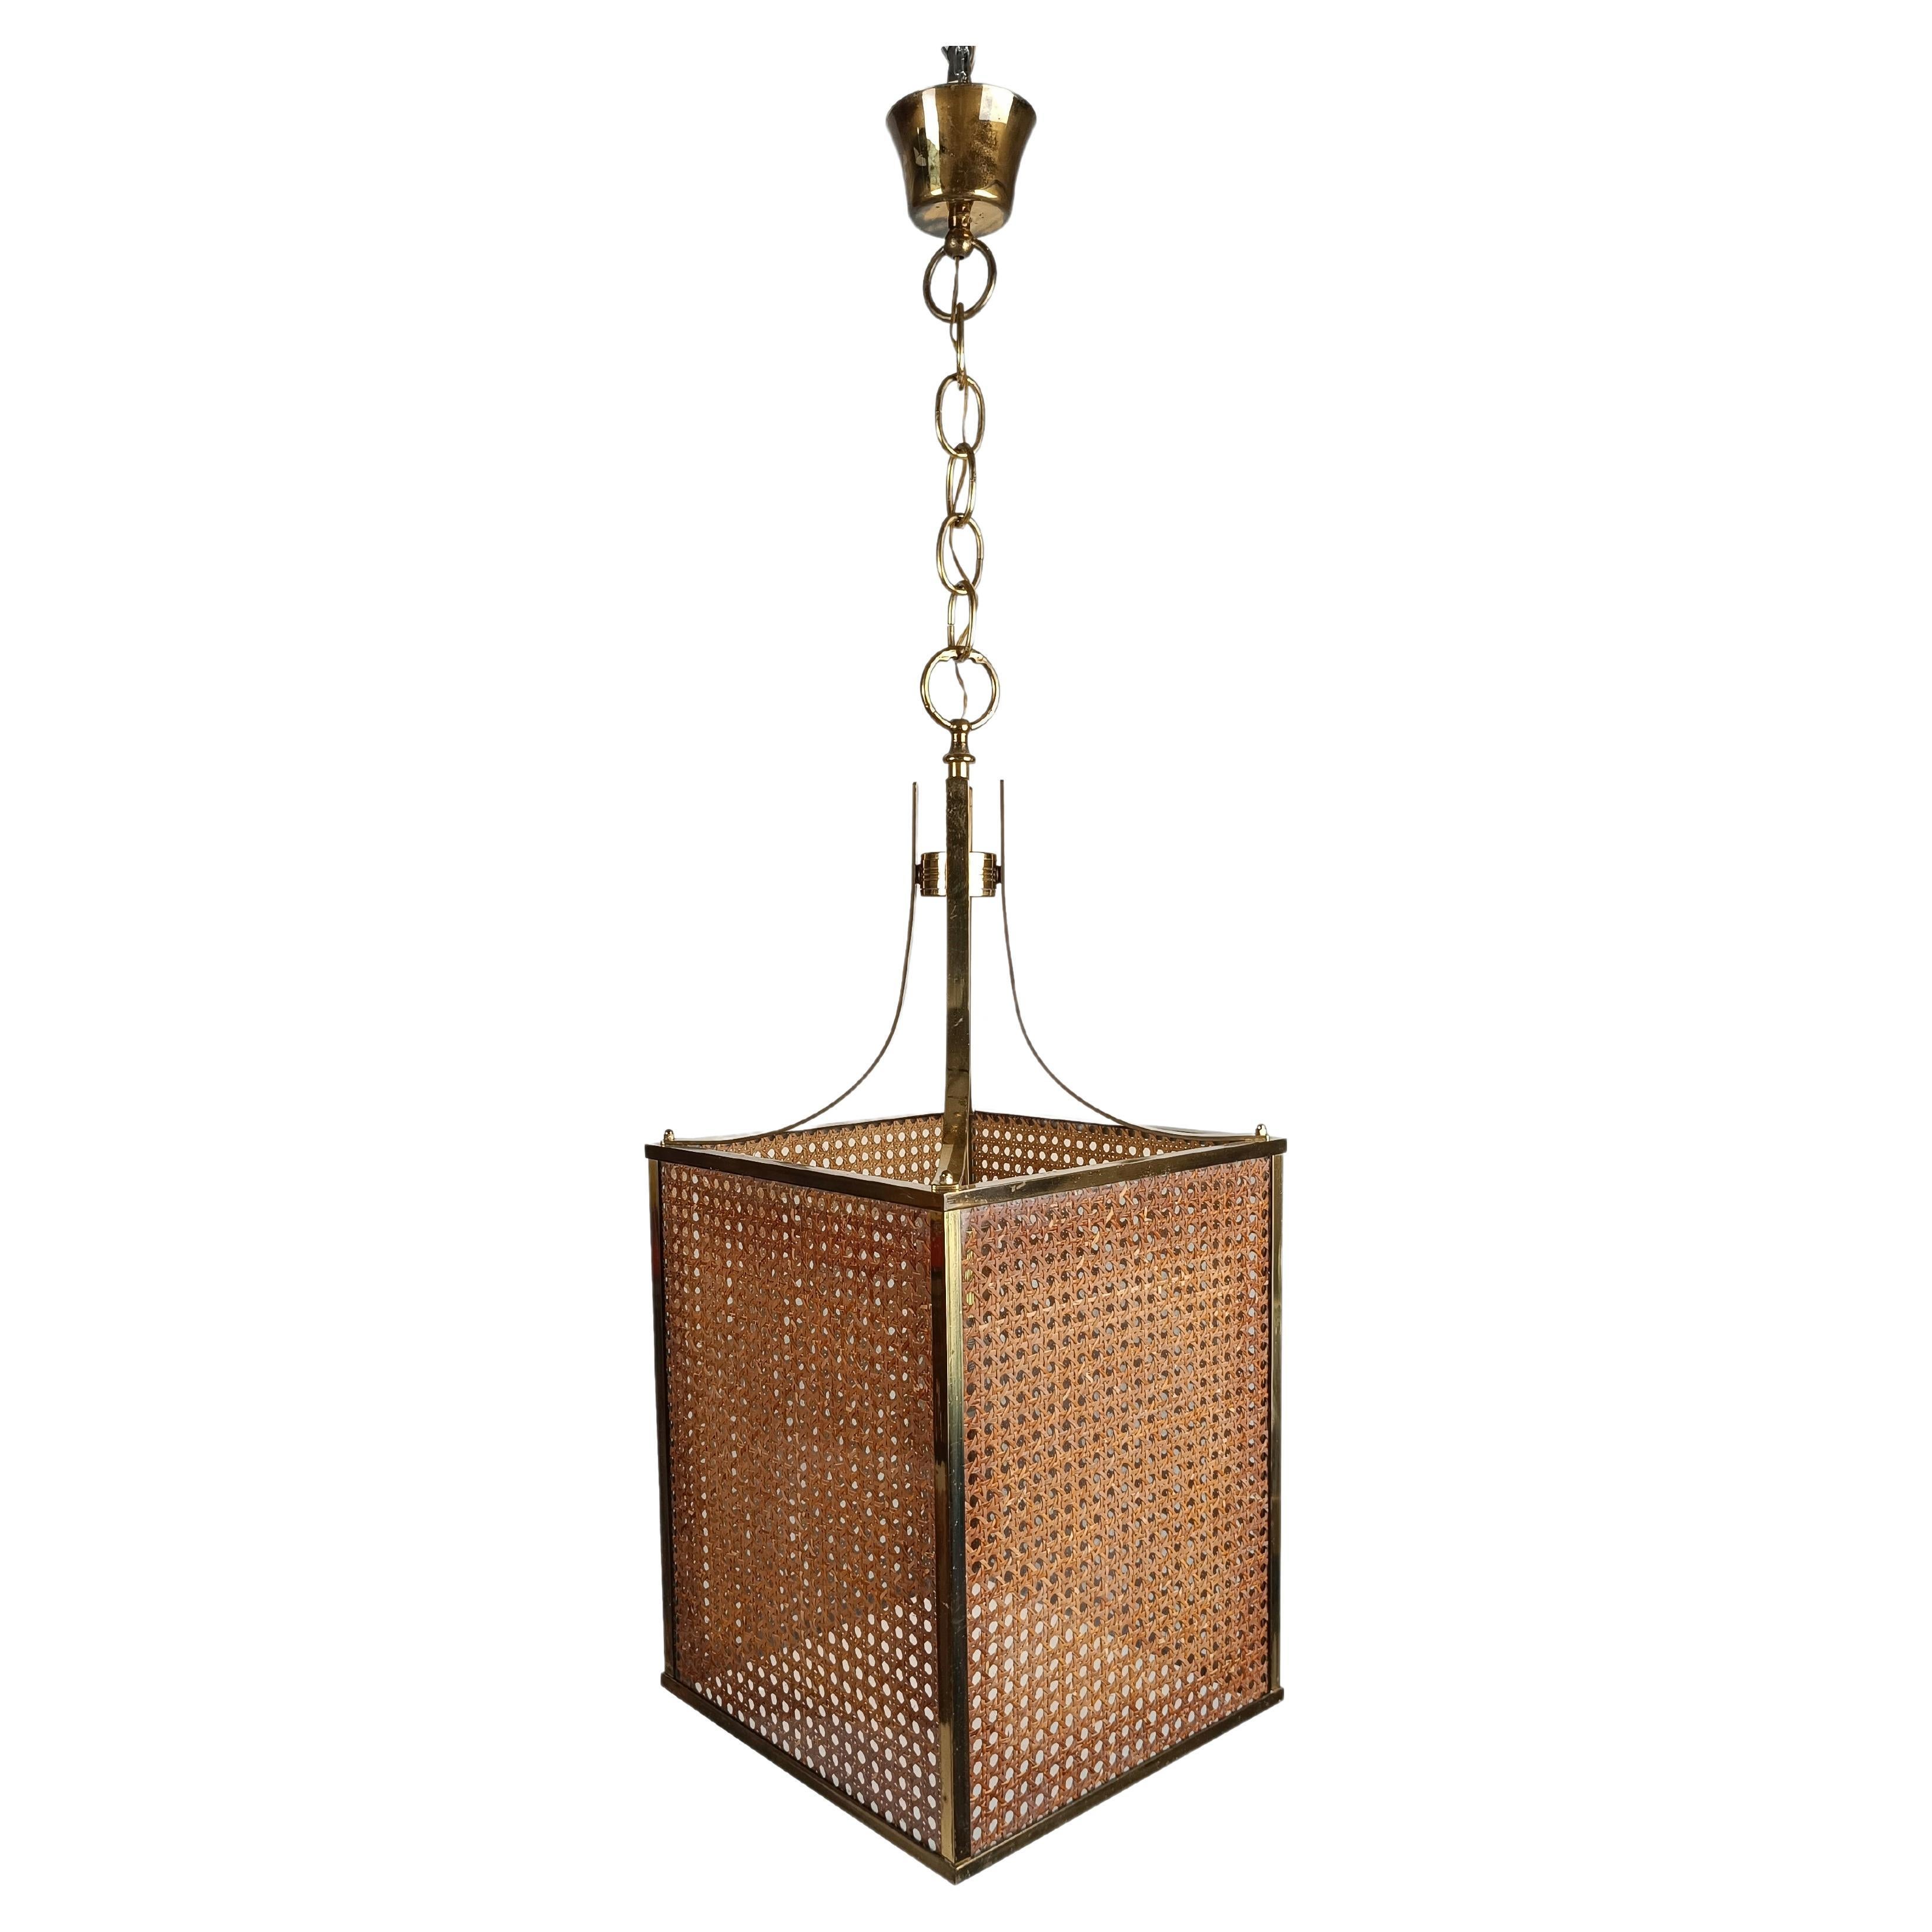 70s Pendant Light made in Brass Glass & Cane Webbing, Chinese Chippendale style 